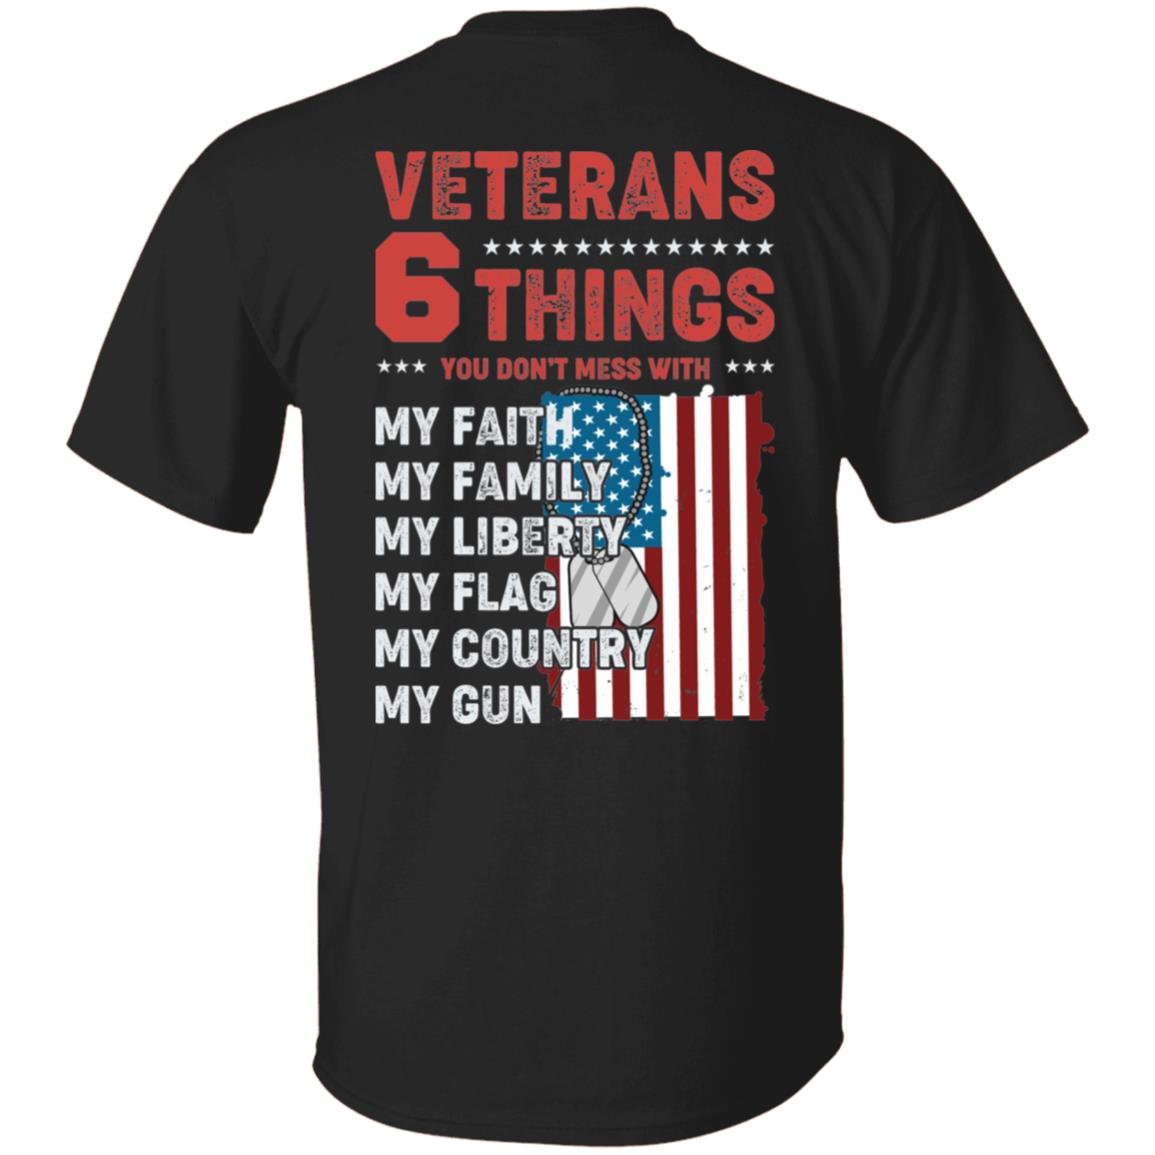 Veteran Tee 6 Things You Dont Mess With USA Flag Shirt